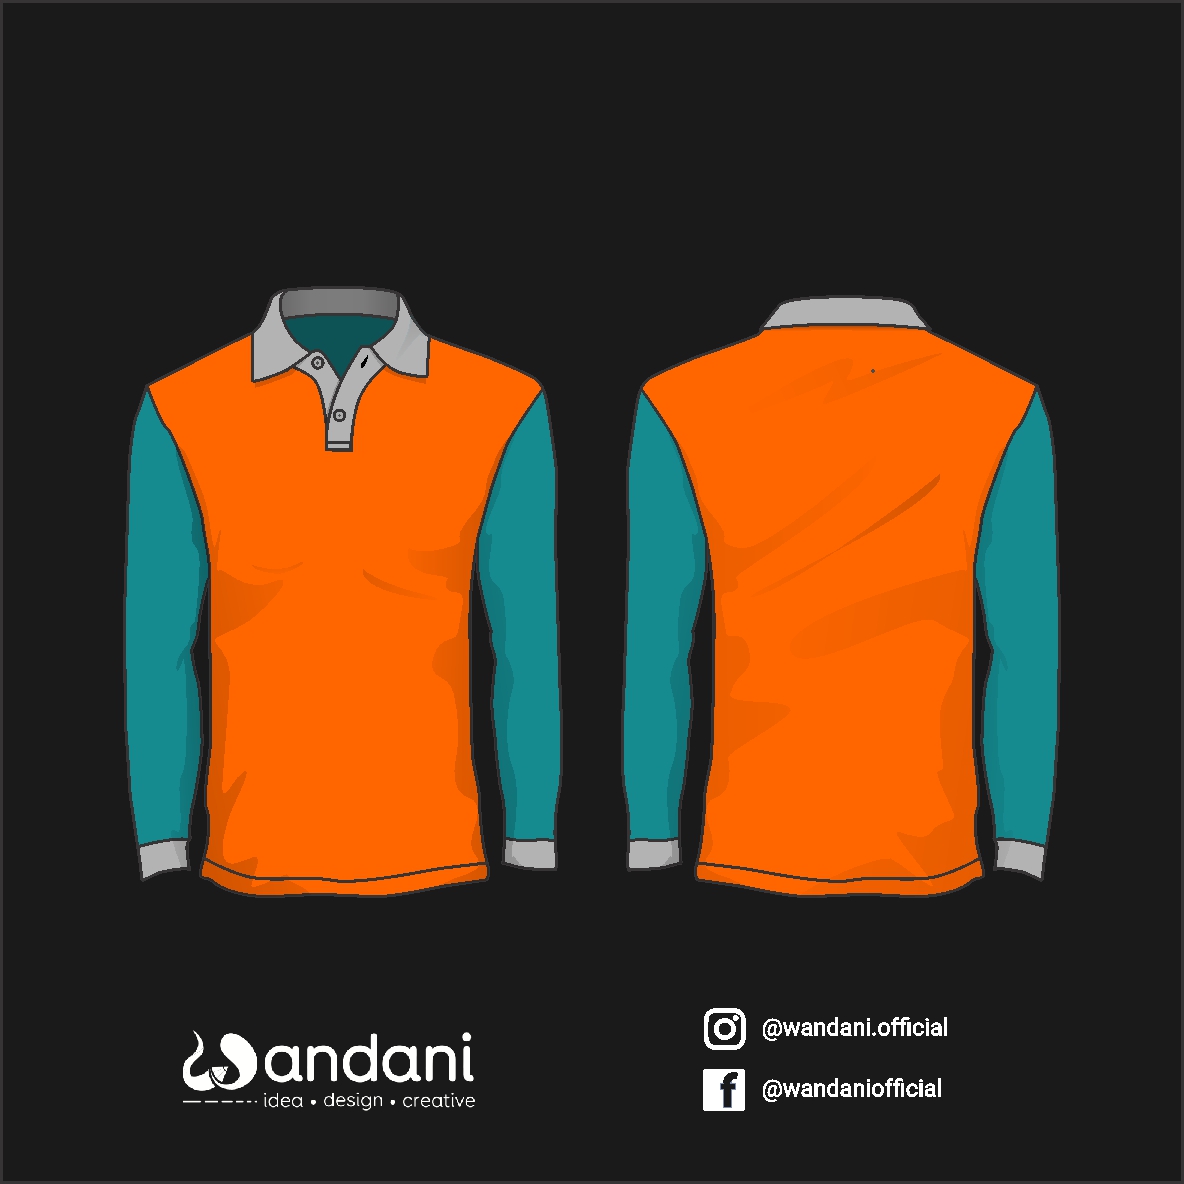 Download 188+ Mockup Jersey Lengan Panjang Cdr Popular Mockups these mockups if you need to present your logo and other branding projects.